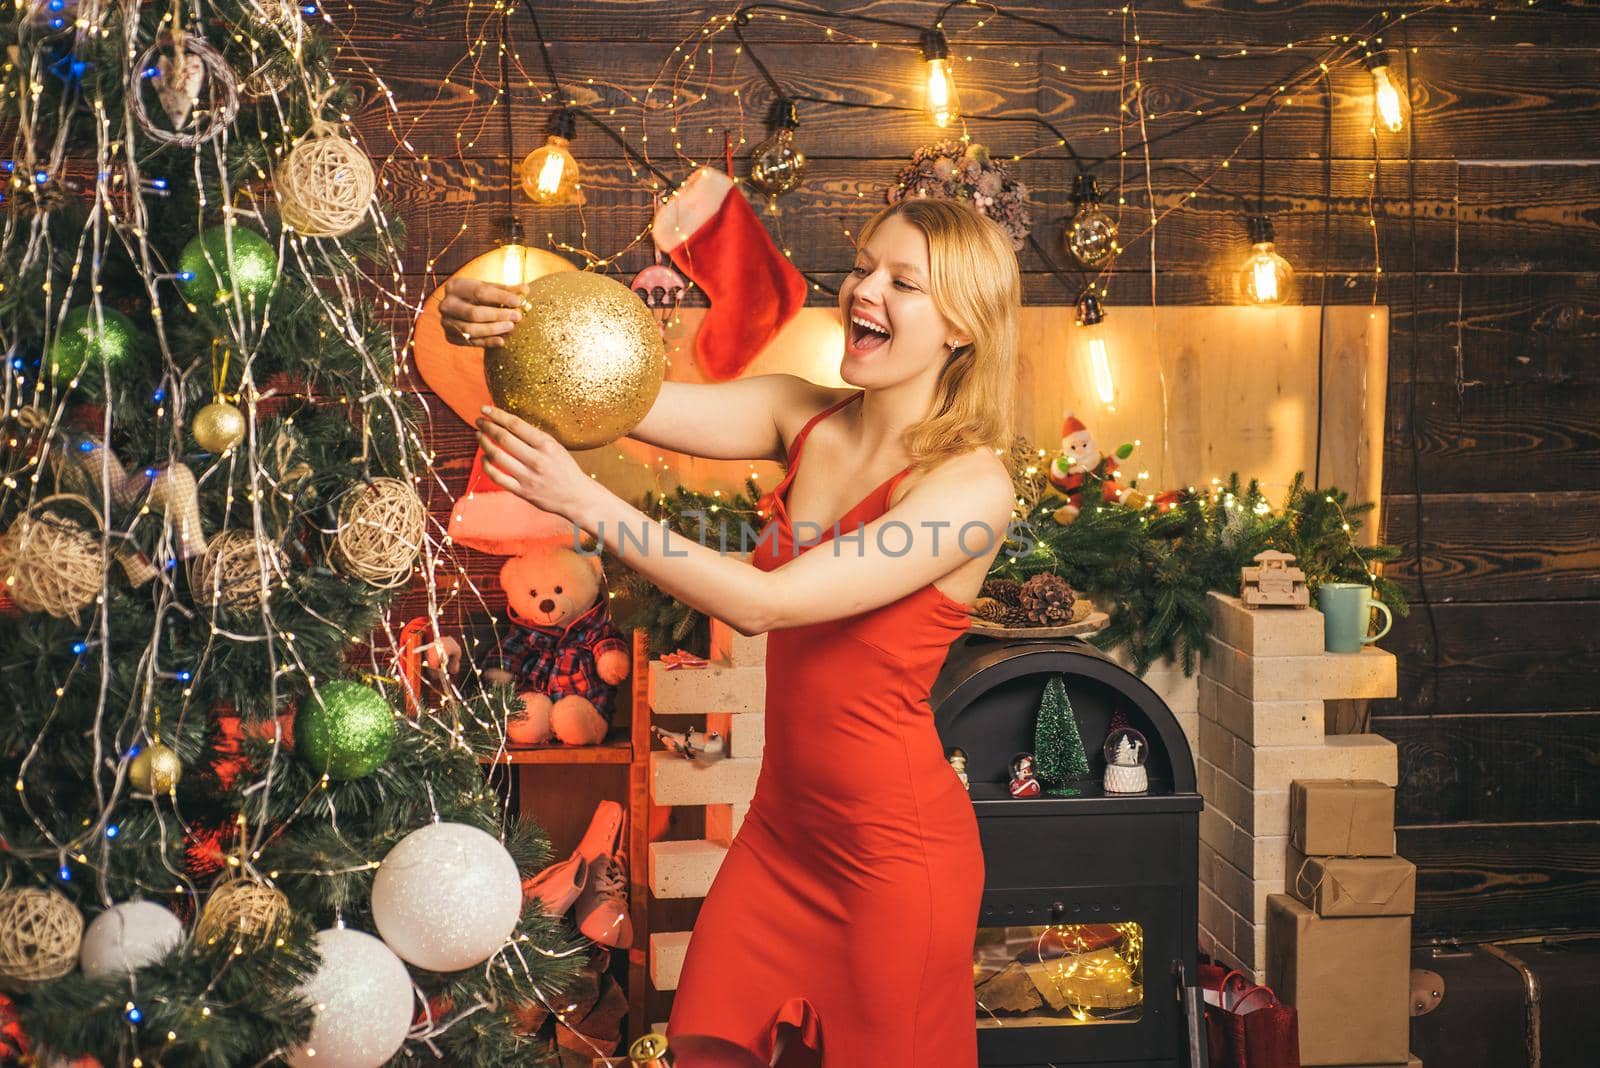 Cheerful smiling blonde woman in red dress decorates Christmas tree with gold ball. Christmas time. Christmas shopping concept. Happy holiday. Xmas tree. New Year surprise present